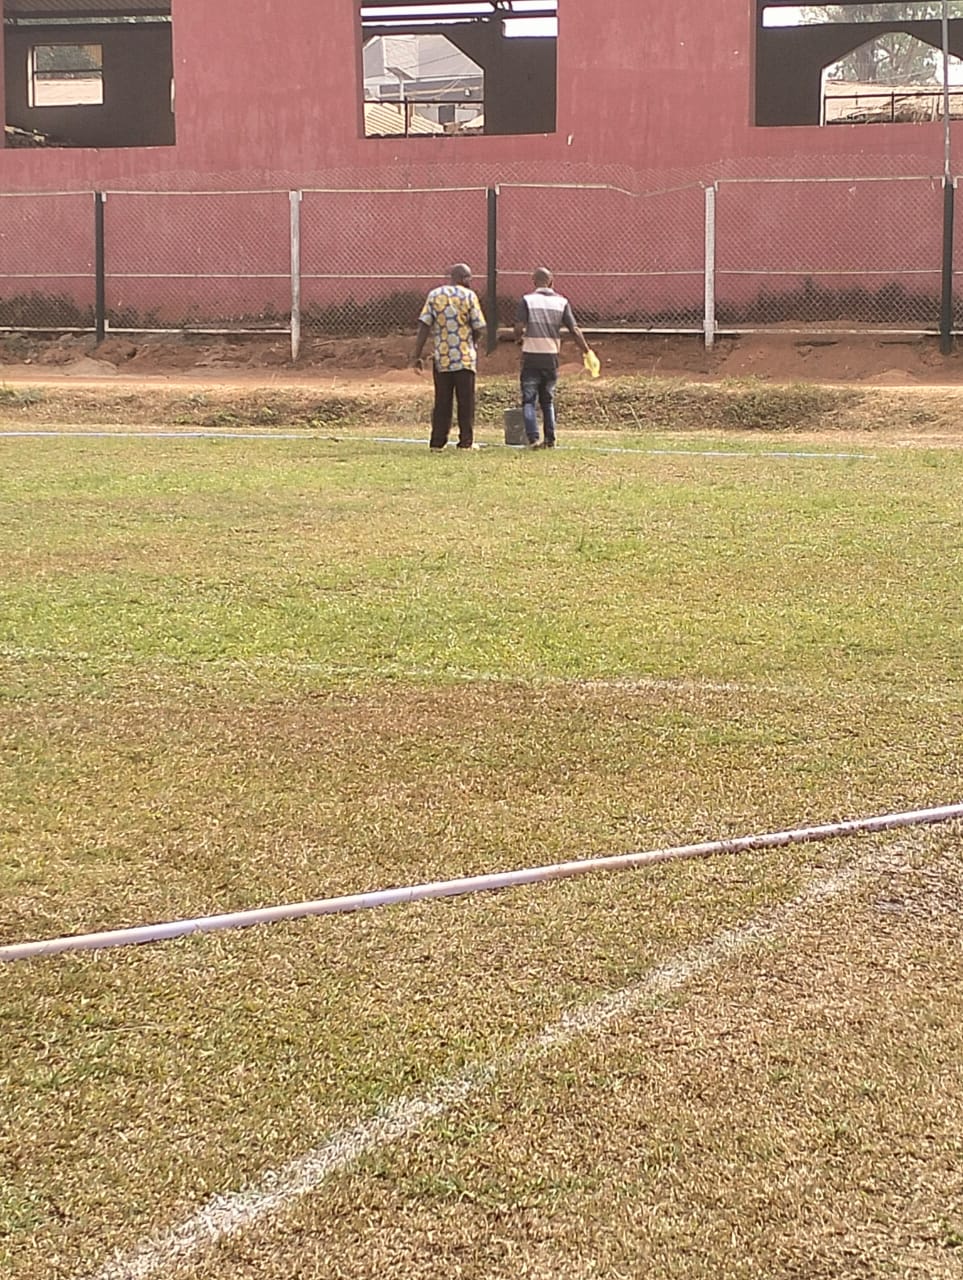 Abia Warriors contract Soil scientists, Grass analysts To Fix Umuahia Township stadium Pitch